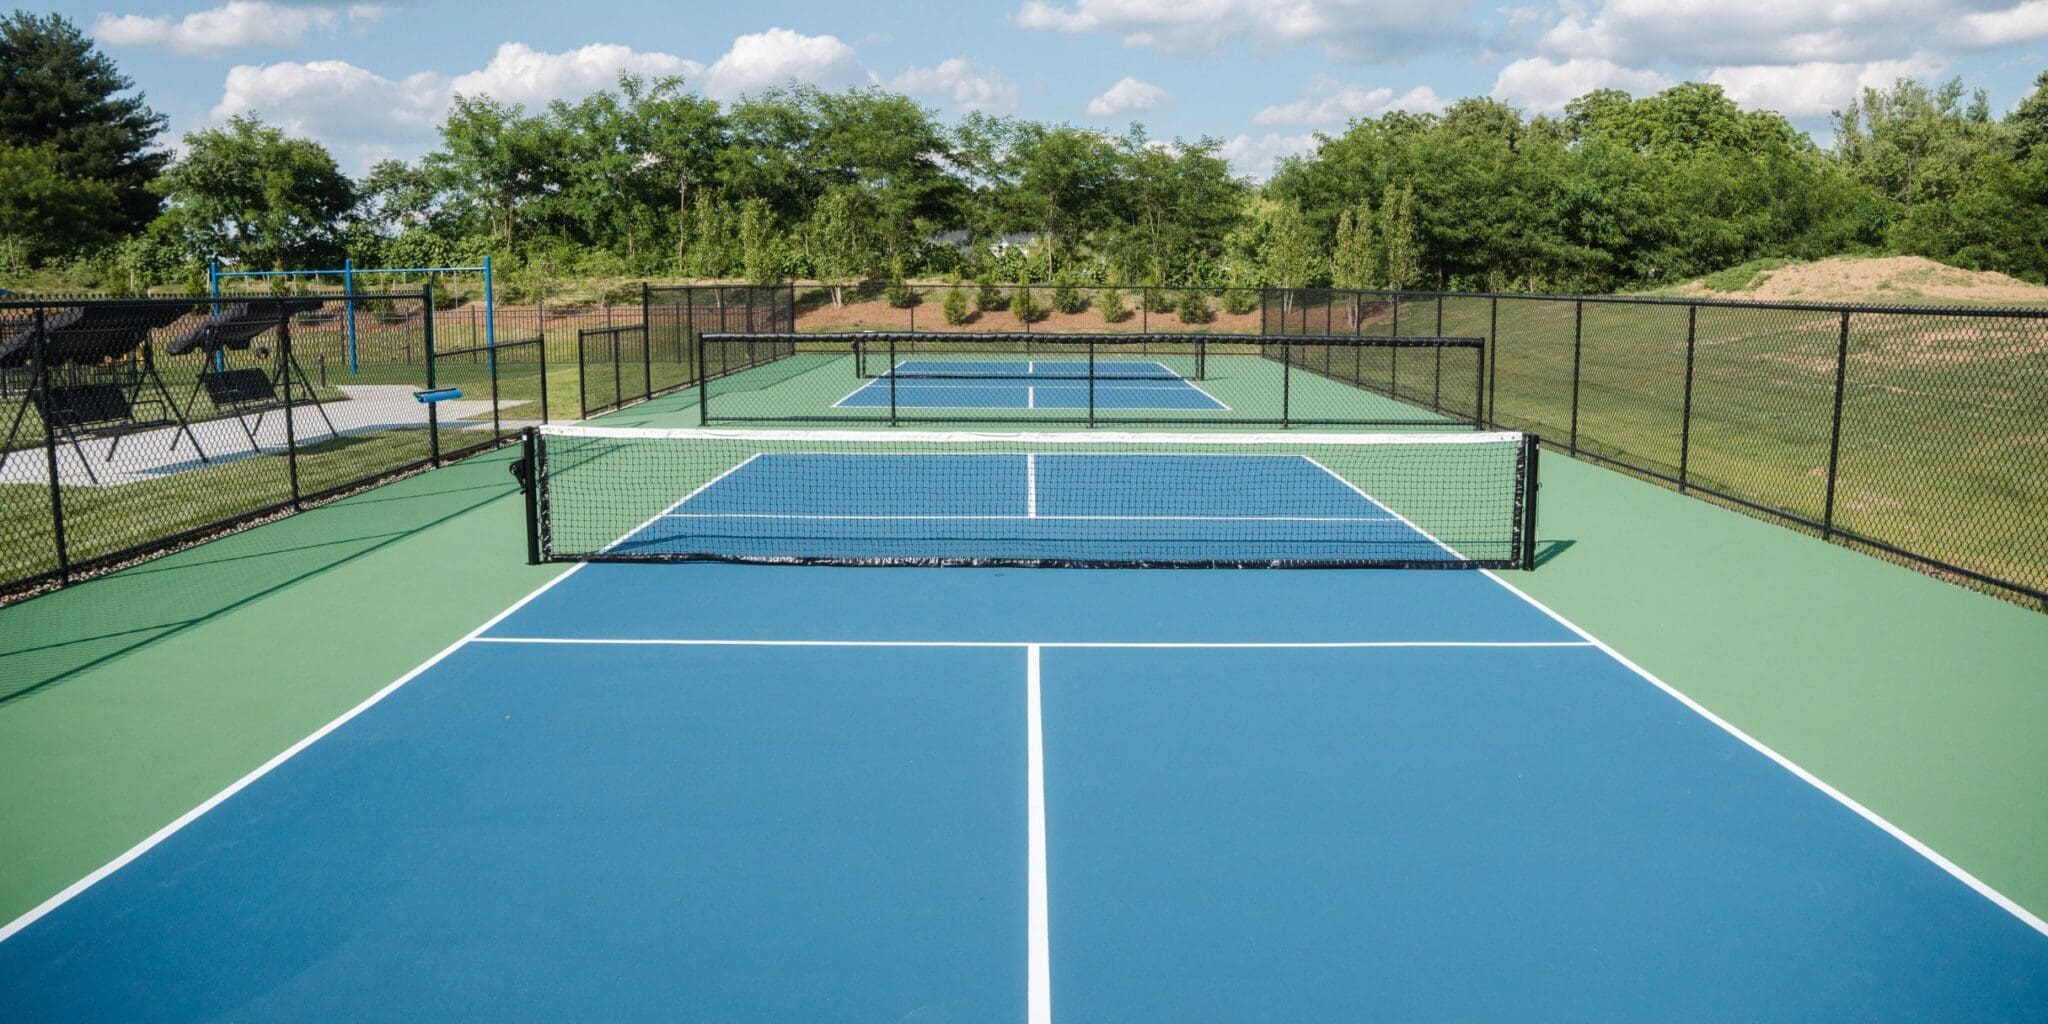 Find More Communities With Pickleball - Rivers Pointe Estates